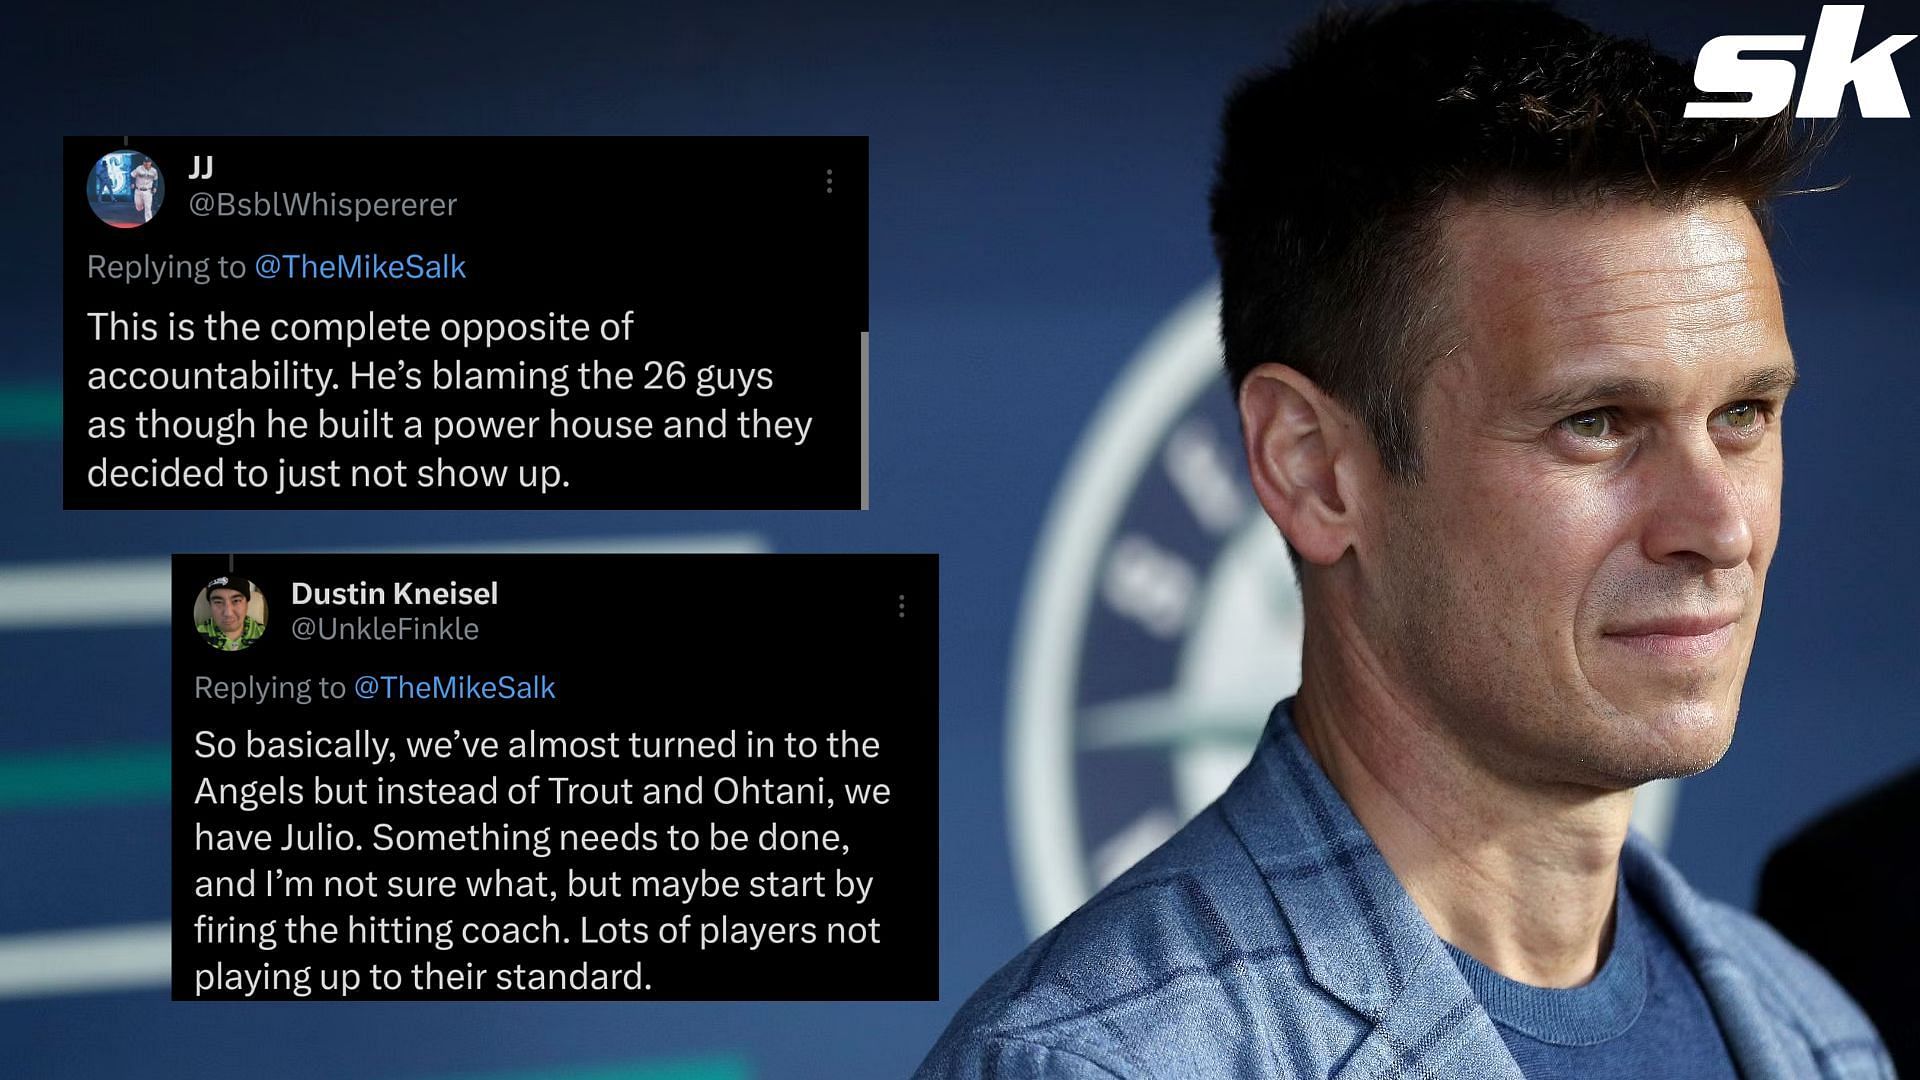 Jerry Dipoto says there's no easy fix as Mariners are 'struggling madly